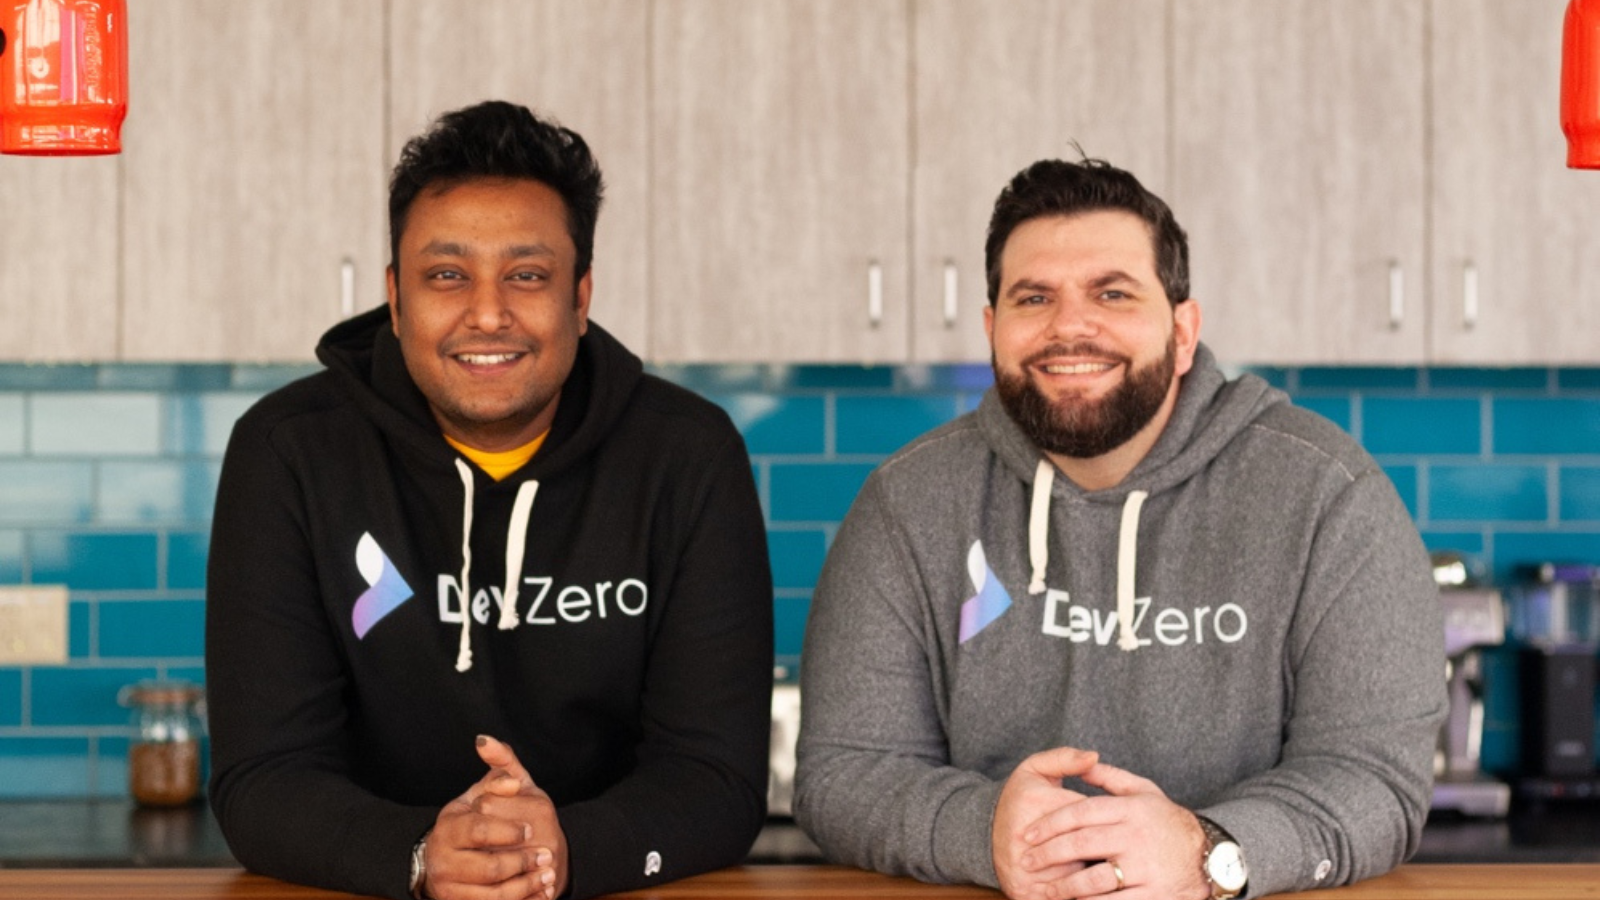 DevZero co-founders Debo Ray (left) and Rob Fletcher (right) pose for a photo